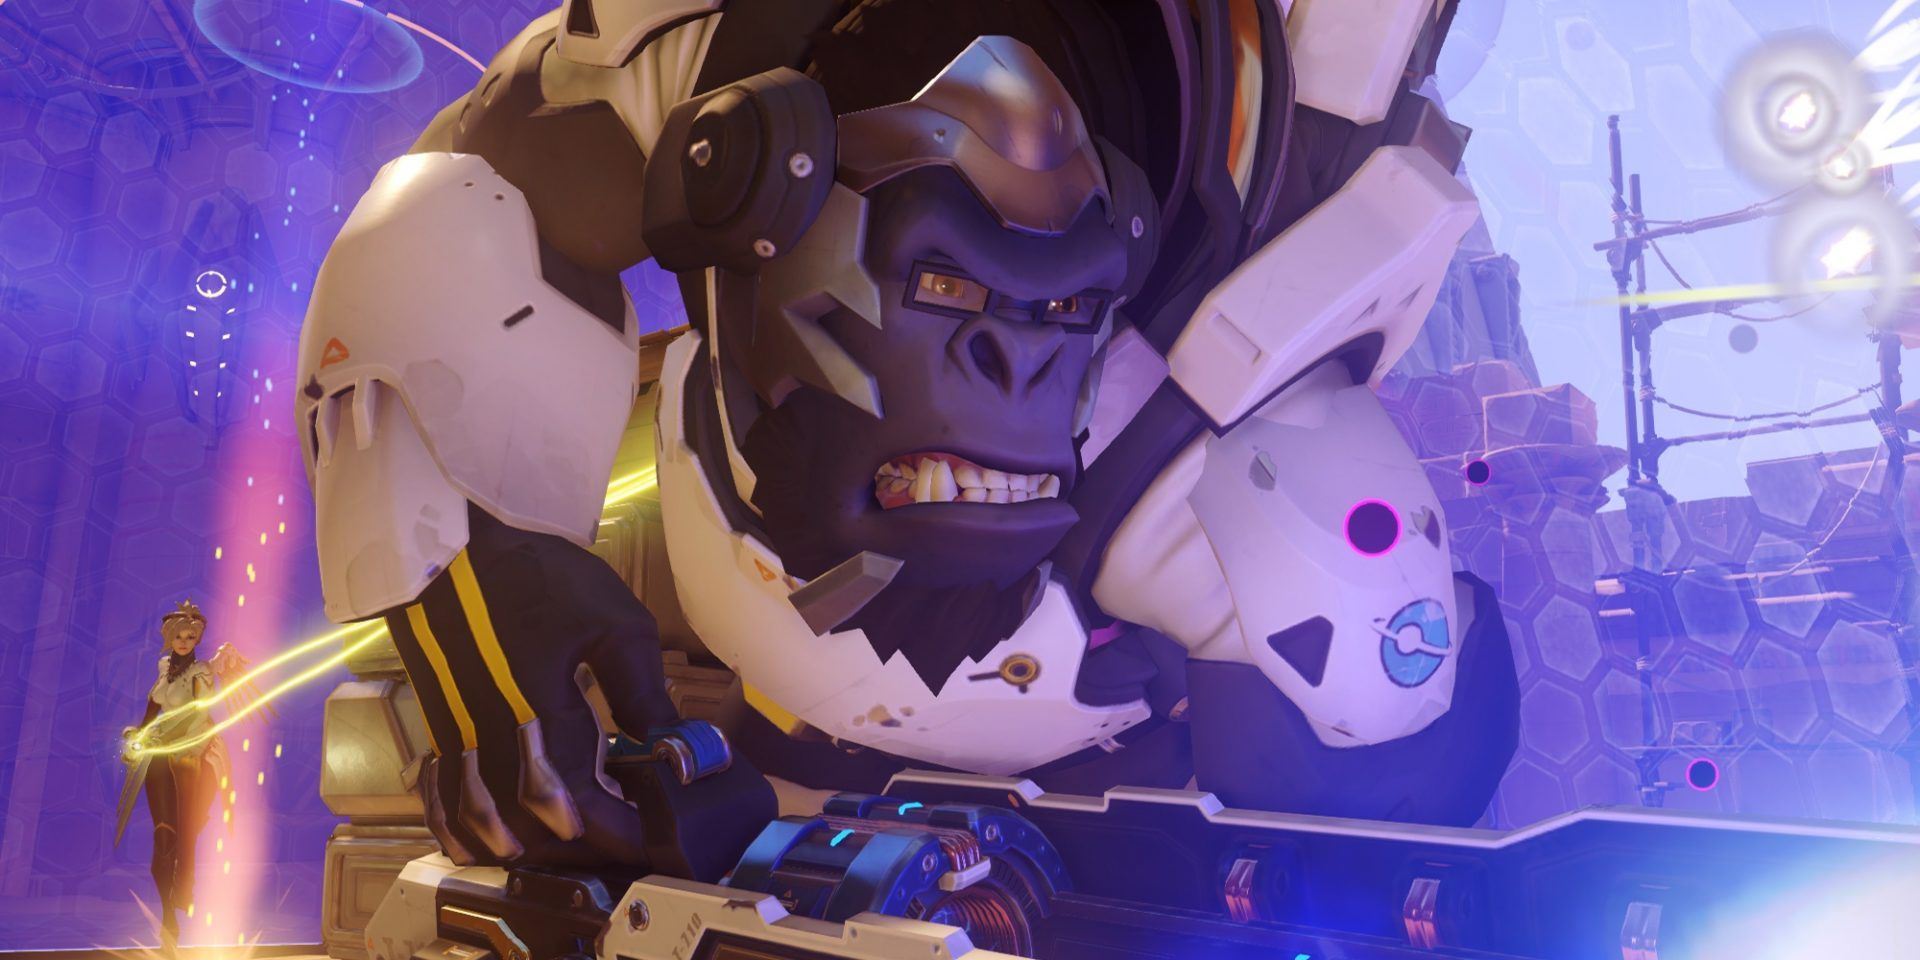 Winston protecting Mercy and using his shield